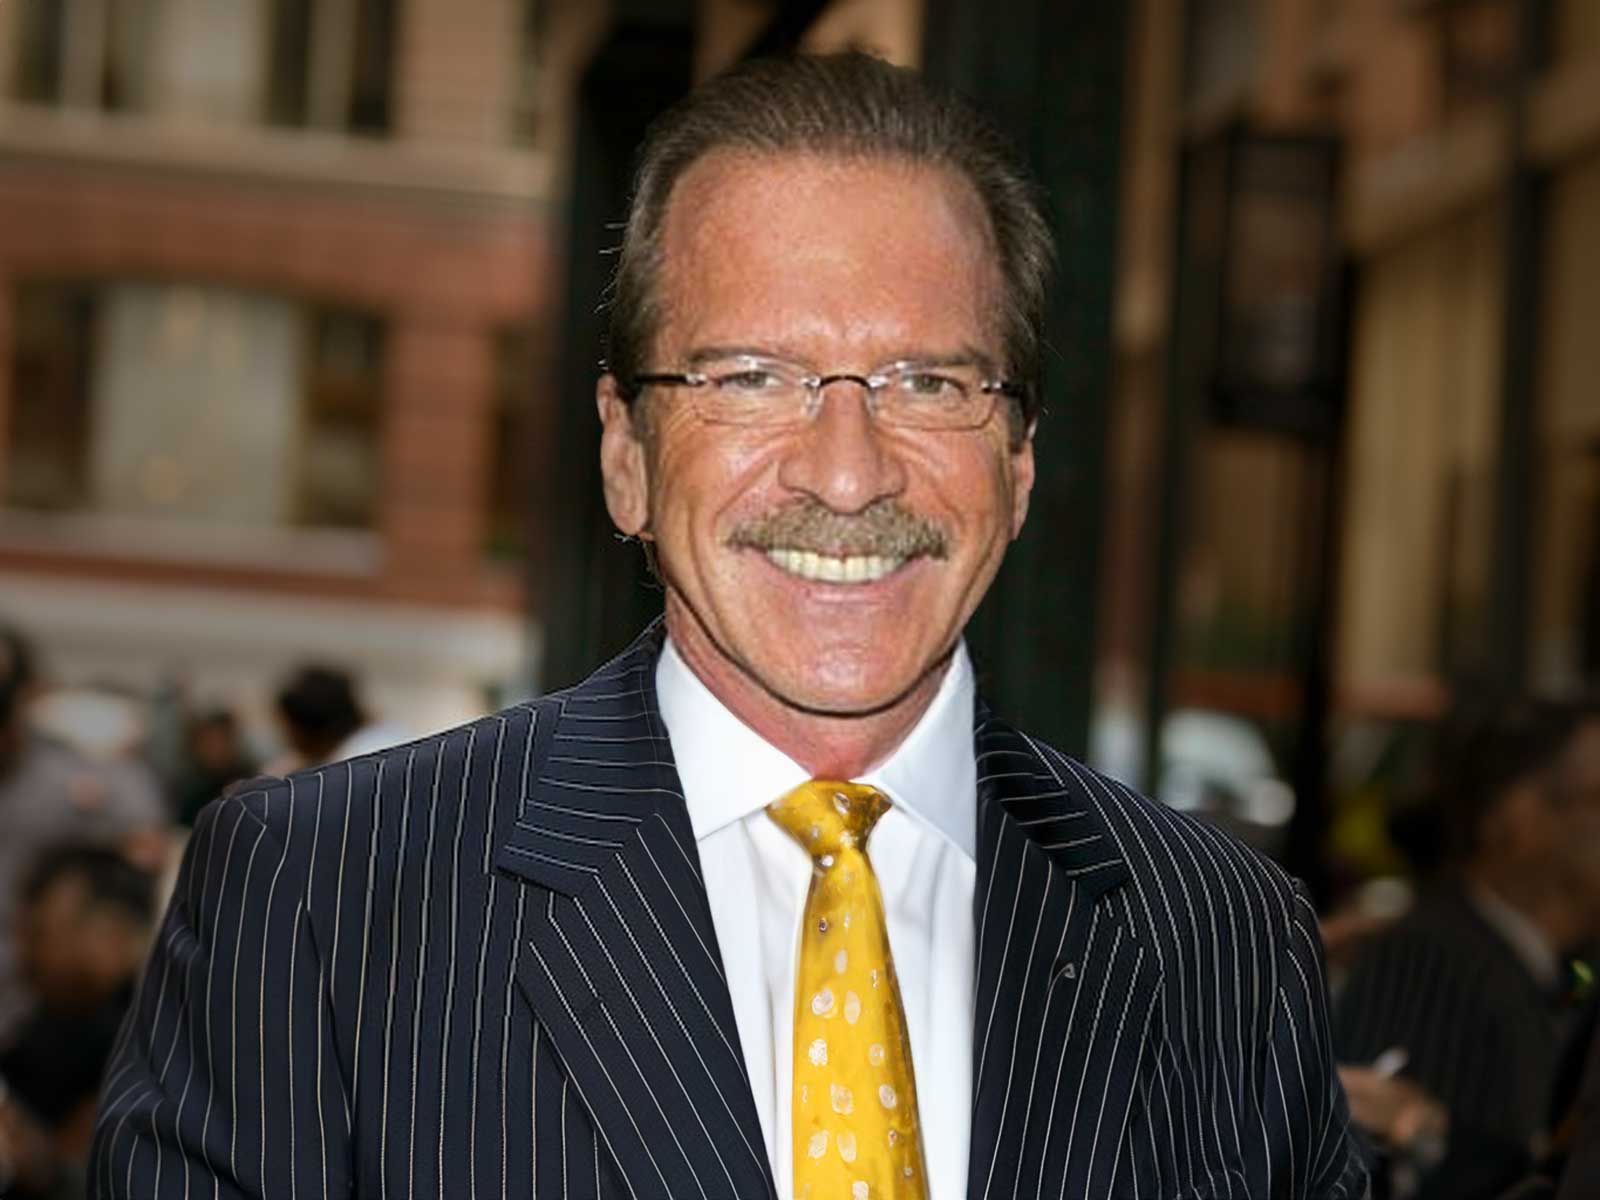 Pat O'Brien With Glasses, A Mustache, And Greying Hair Smiles While Wearing A Pinstripe Suit And Blue Tie Outdoors, Reminiscent Of The Composed Image Pat O'Brien Held Before The Scandal.